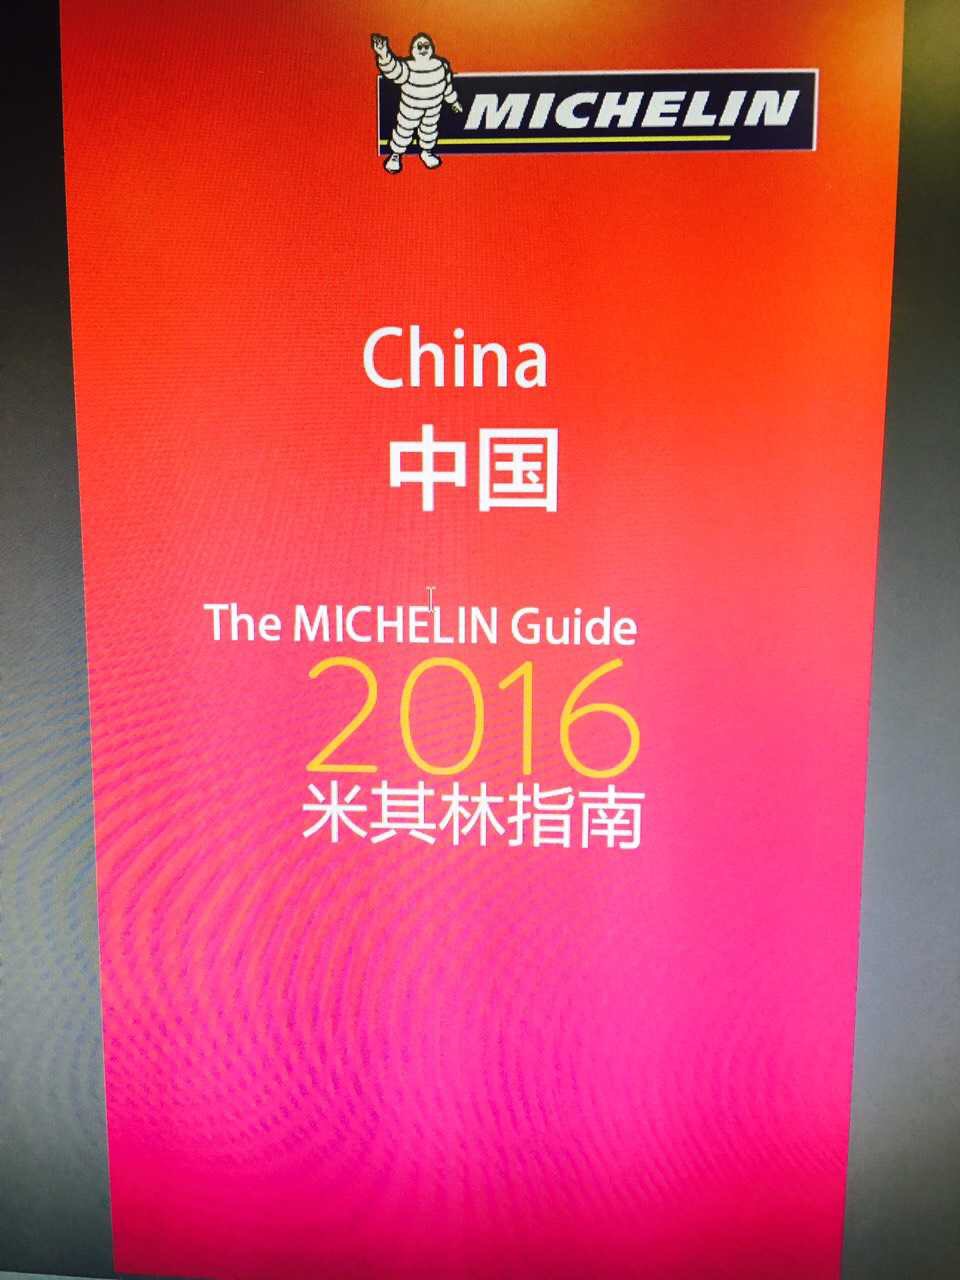 Michelin Guide is Coming to Shanghai